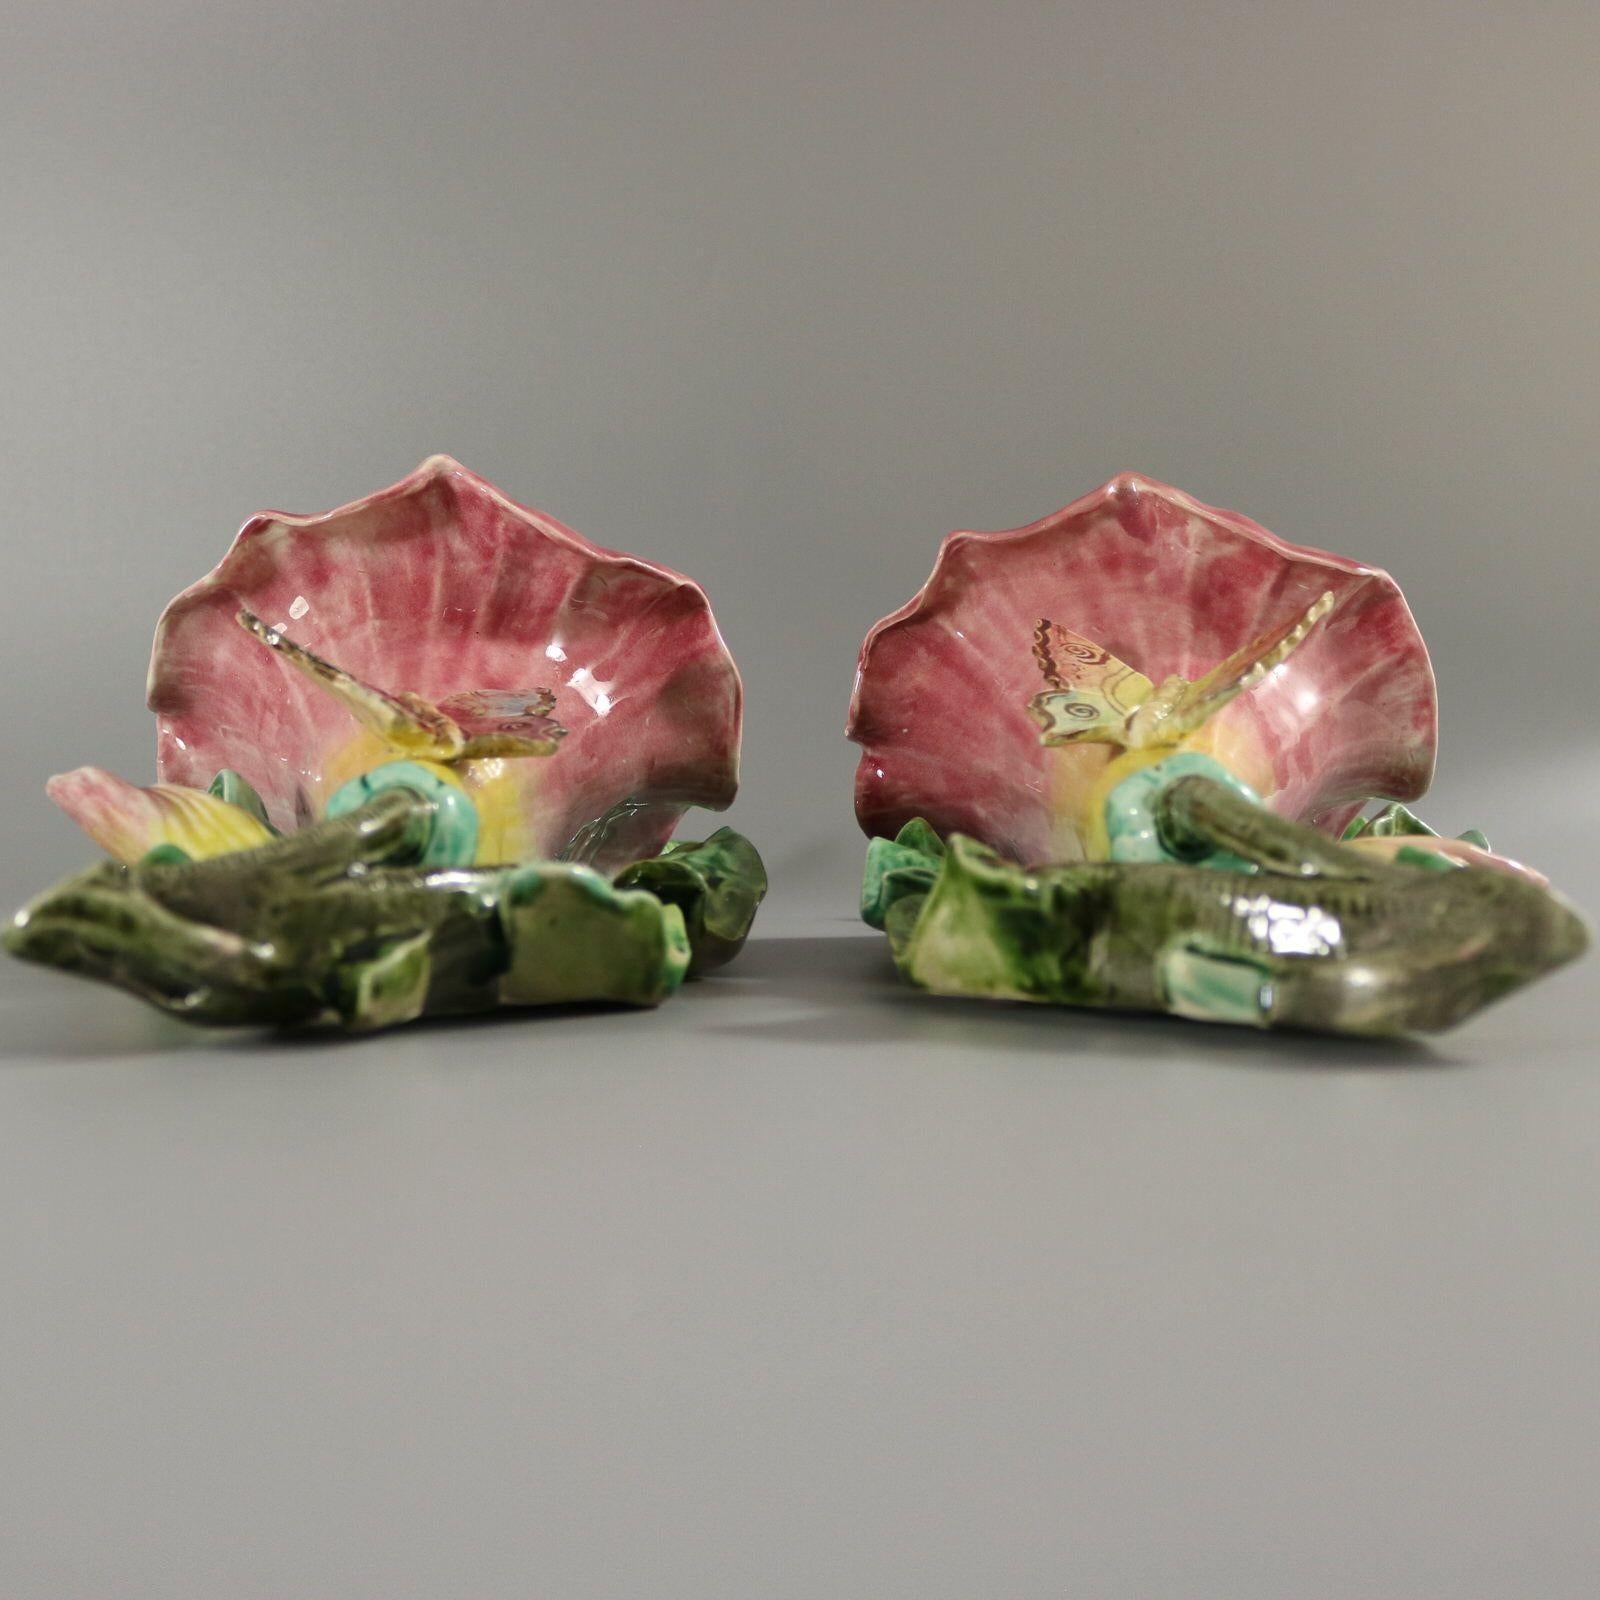 Pair of Fives-Lille French Majolica wall pockets which feature a large flower on a bed of leaves. A butterfly sits on the flower. Colouration: pink, green, yellow, are predominant. The piece bears maker's marks for the Fives-Lille pottery. Bears a